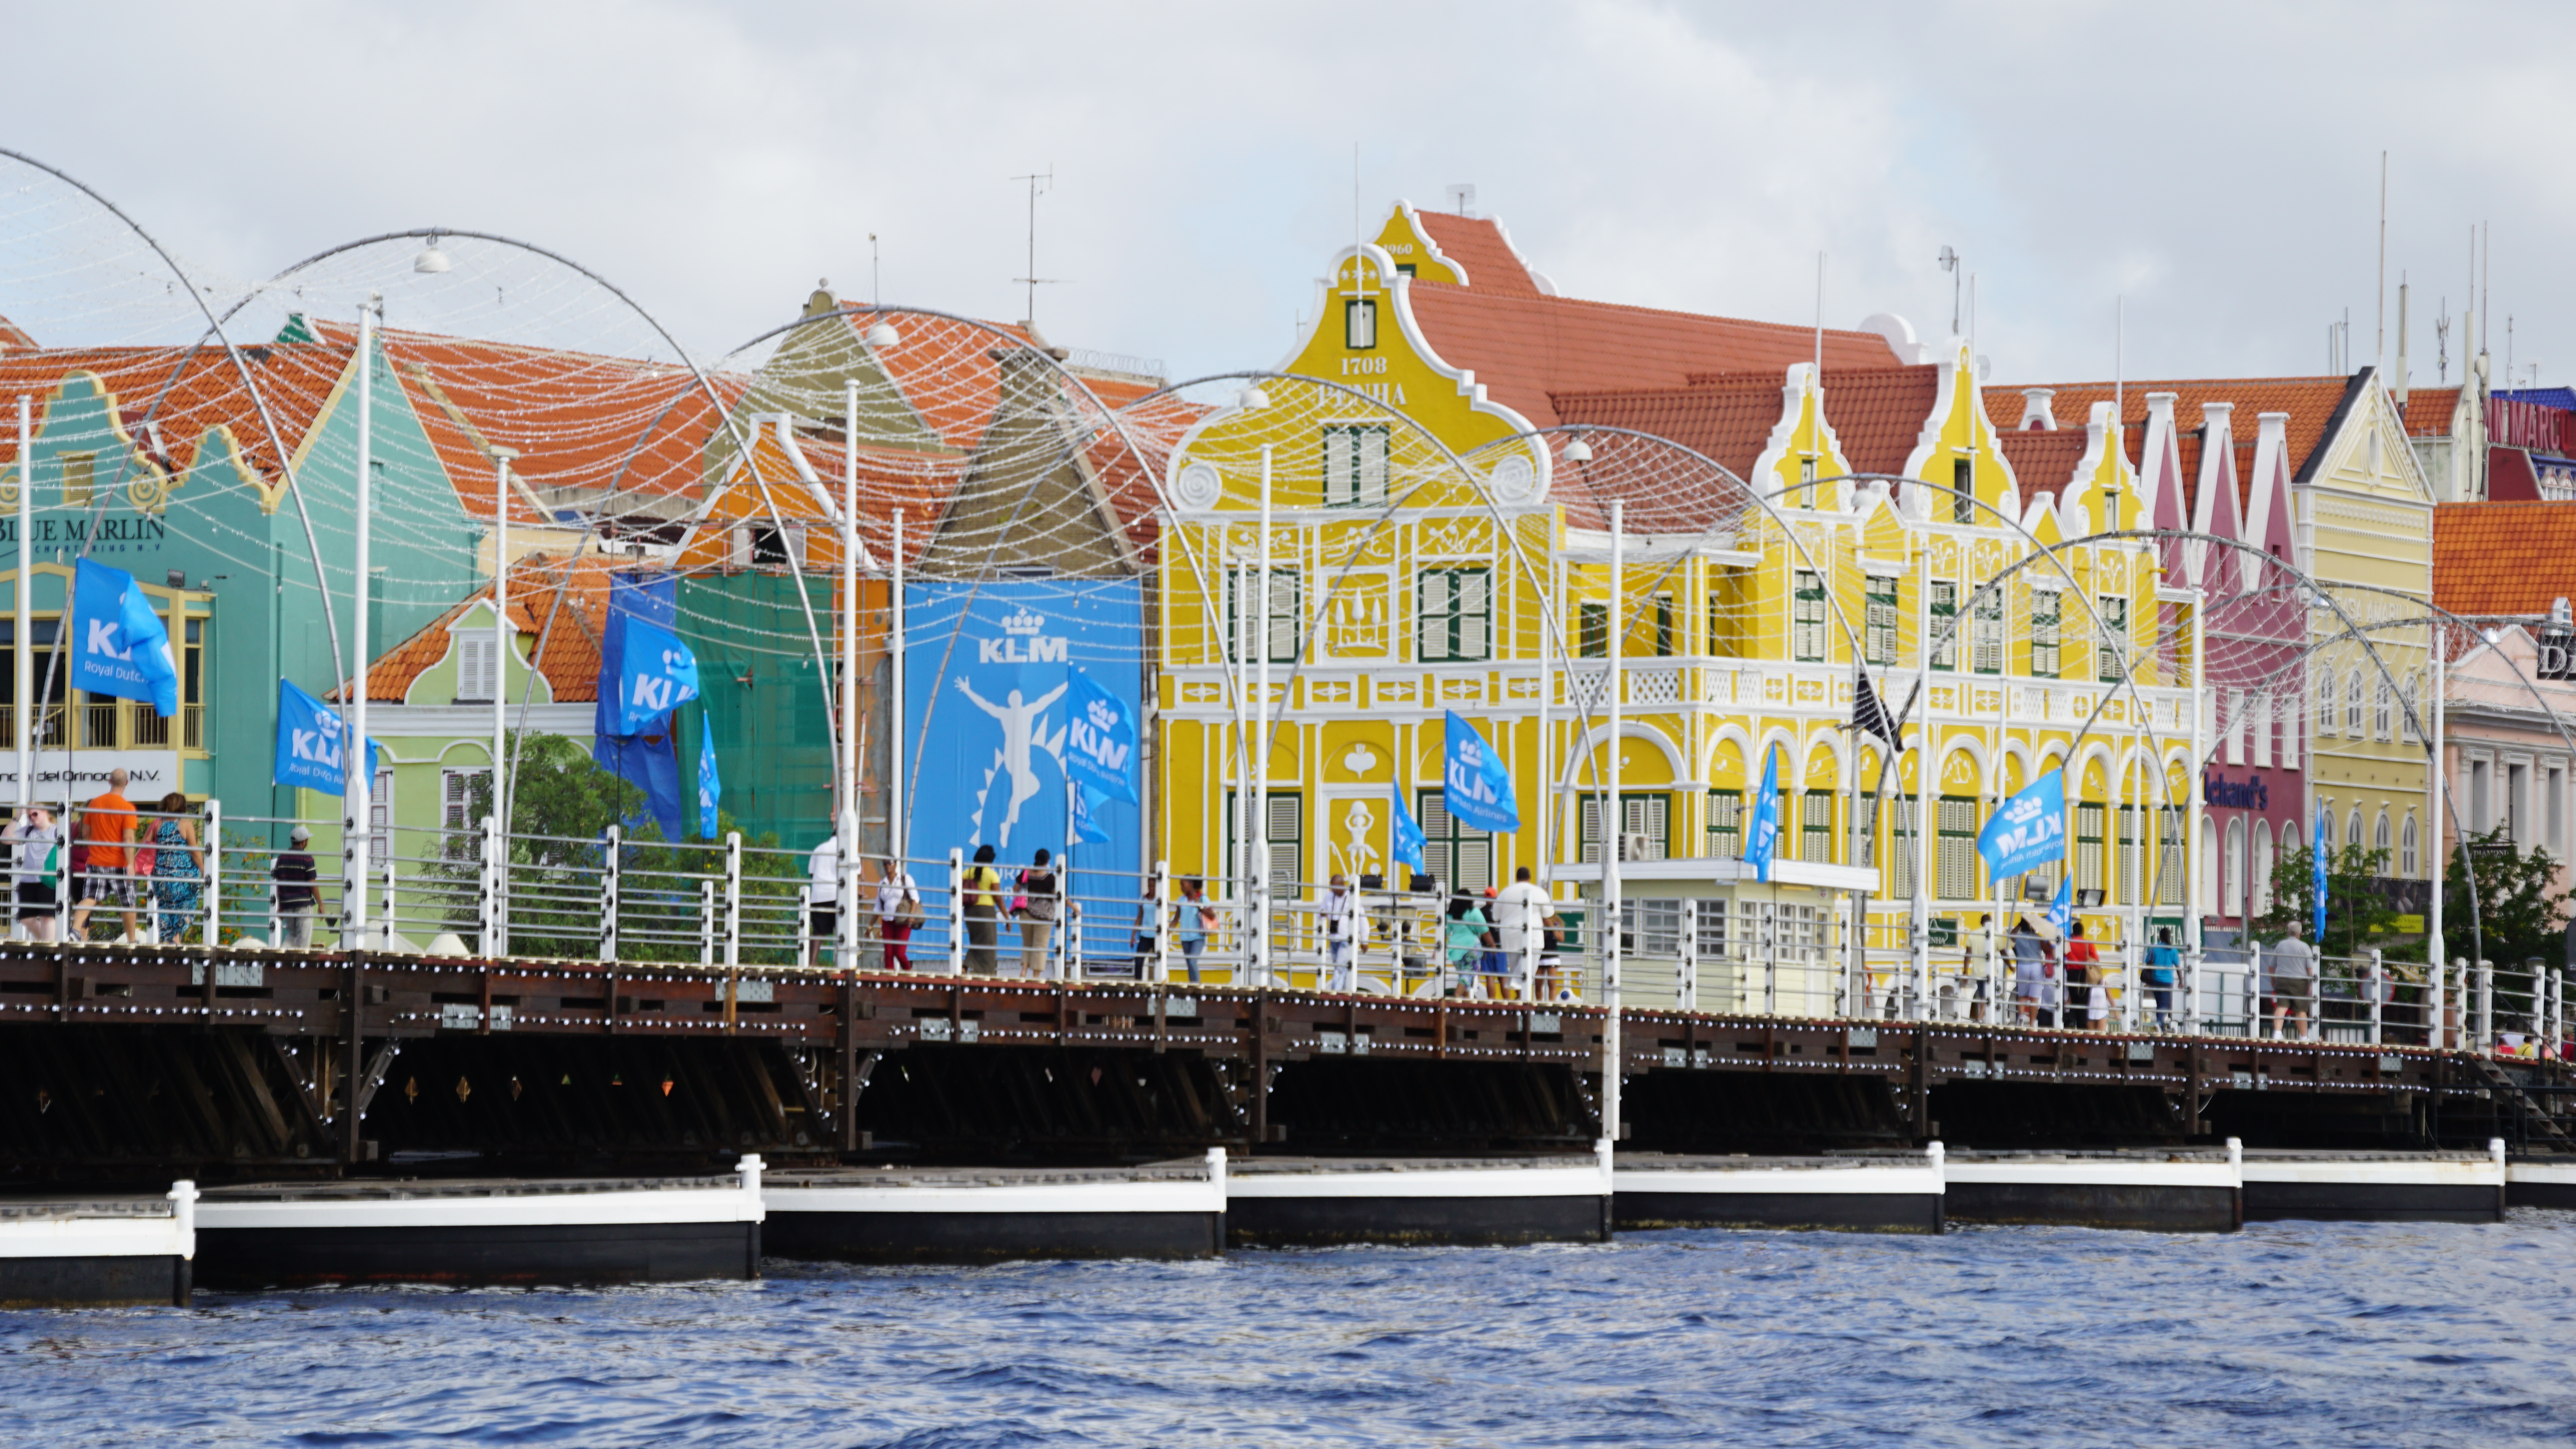 Best Things to Do in Curacao During an Amazing Family Vacation - Queen Emma Pontoon Bridge